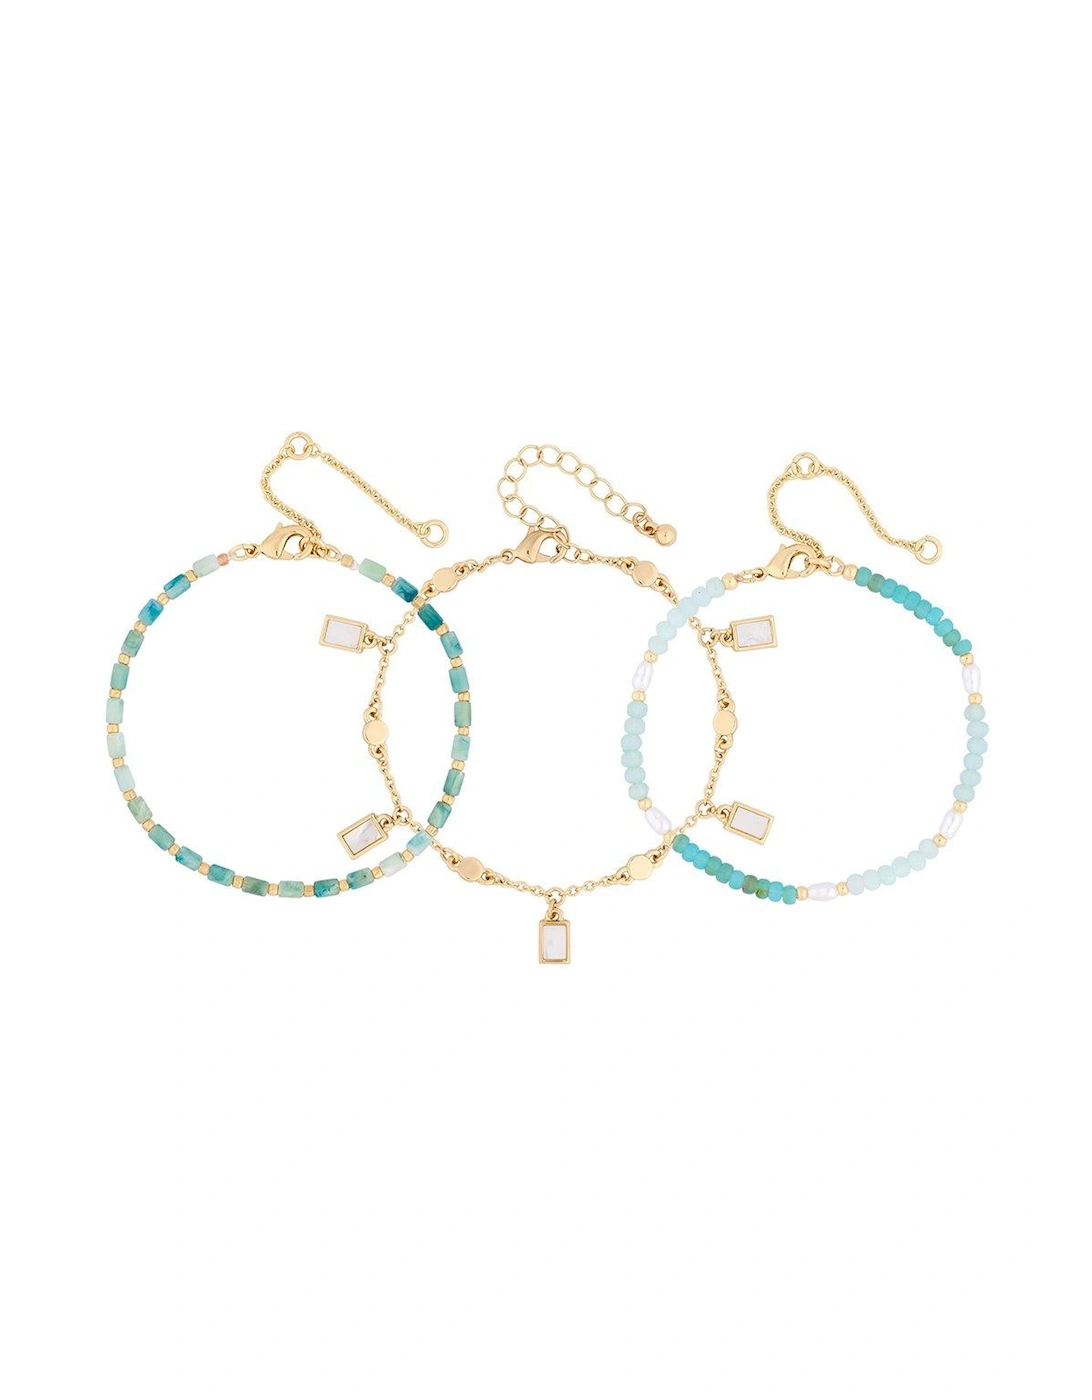 GOLD BLUE COASTAL BEAD AND MOTHER OF PEARL CHARM MULTIPACK BRACELET - PACK OF 3, 2 of 1